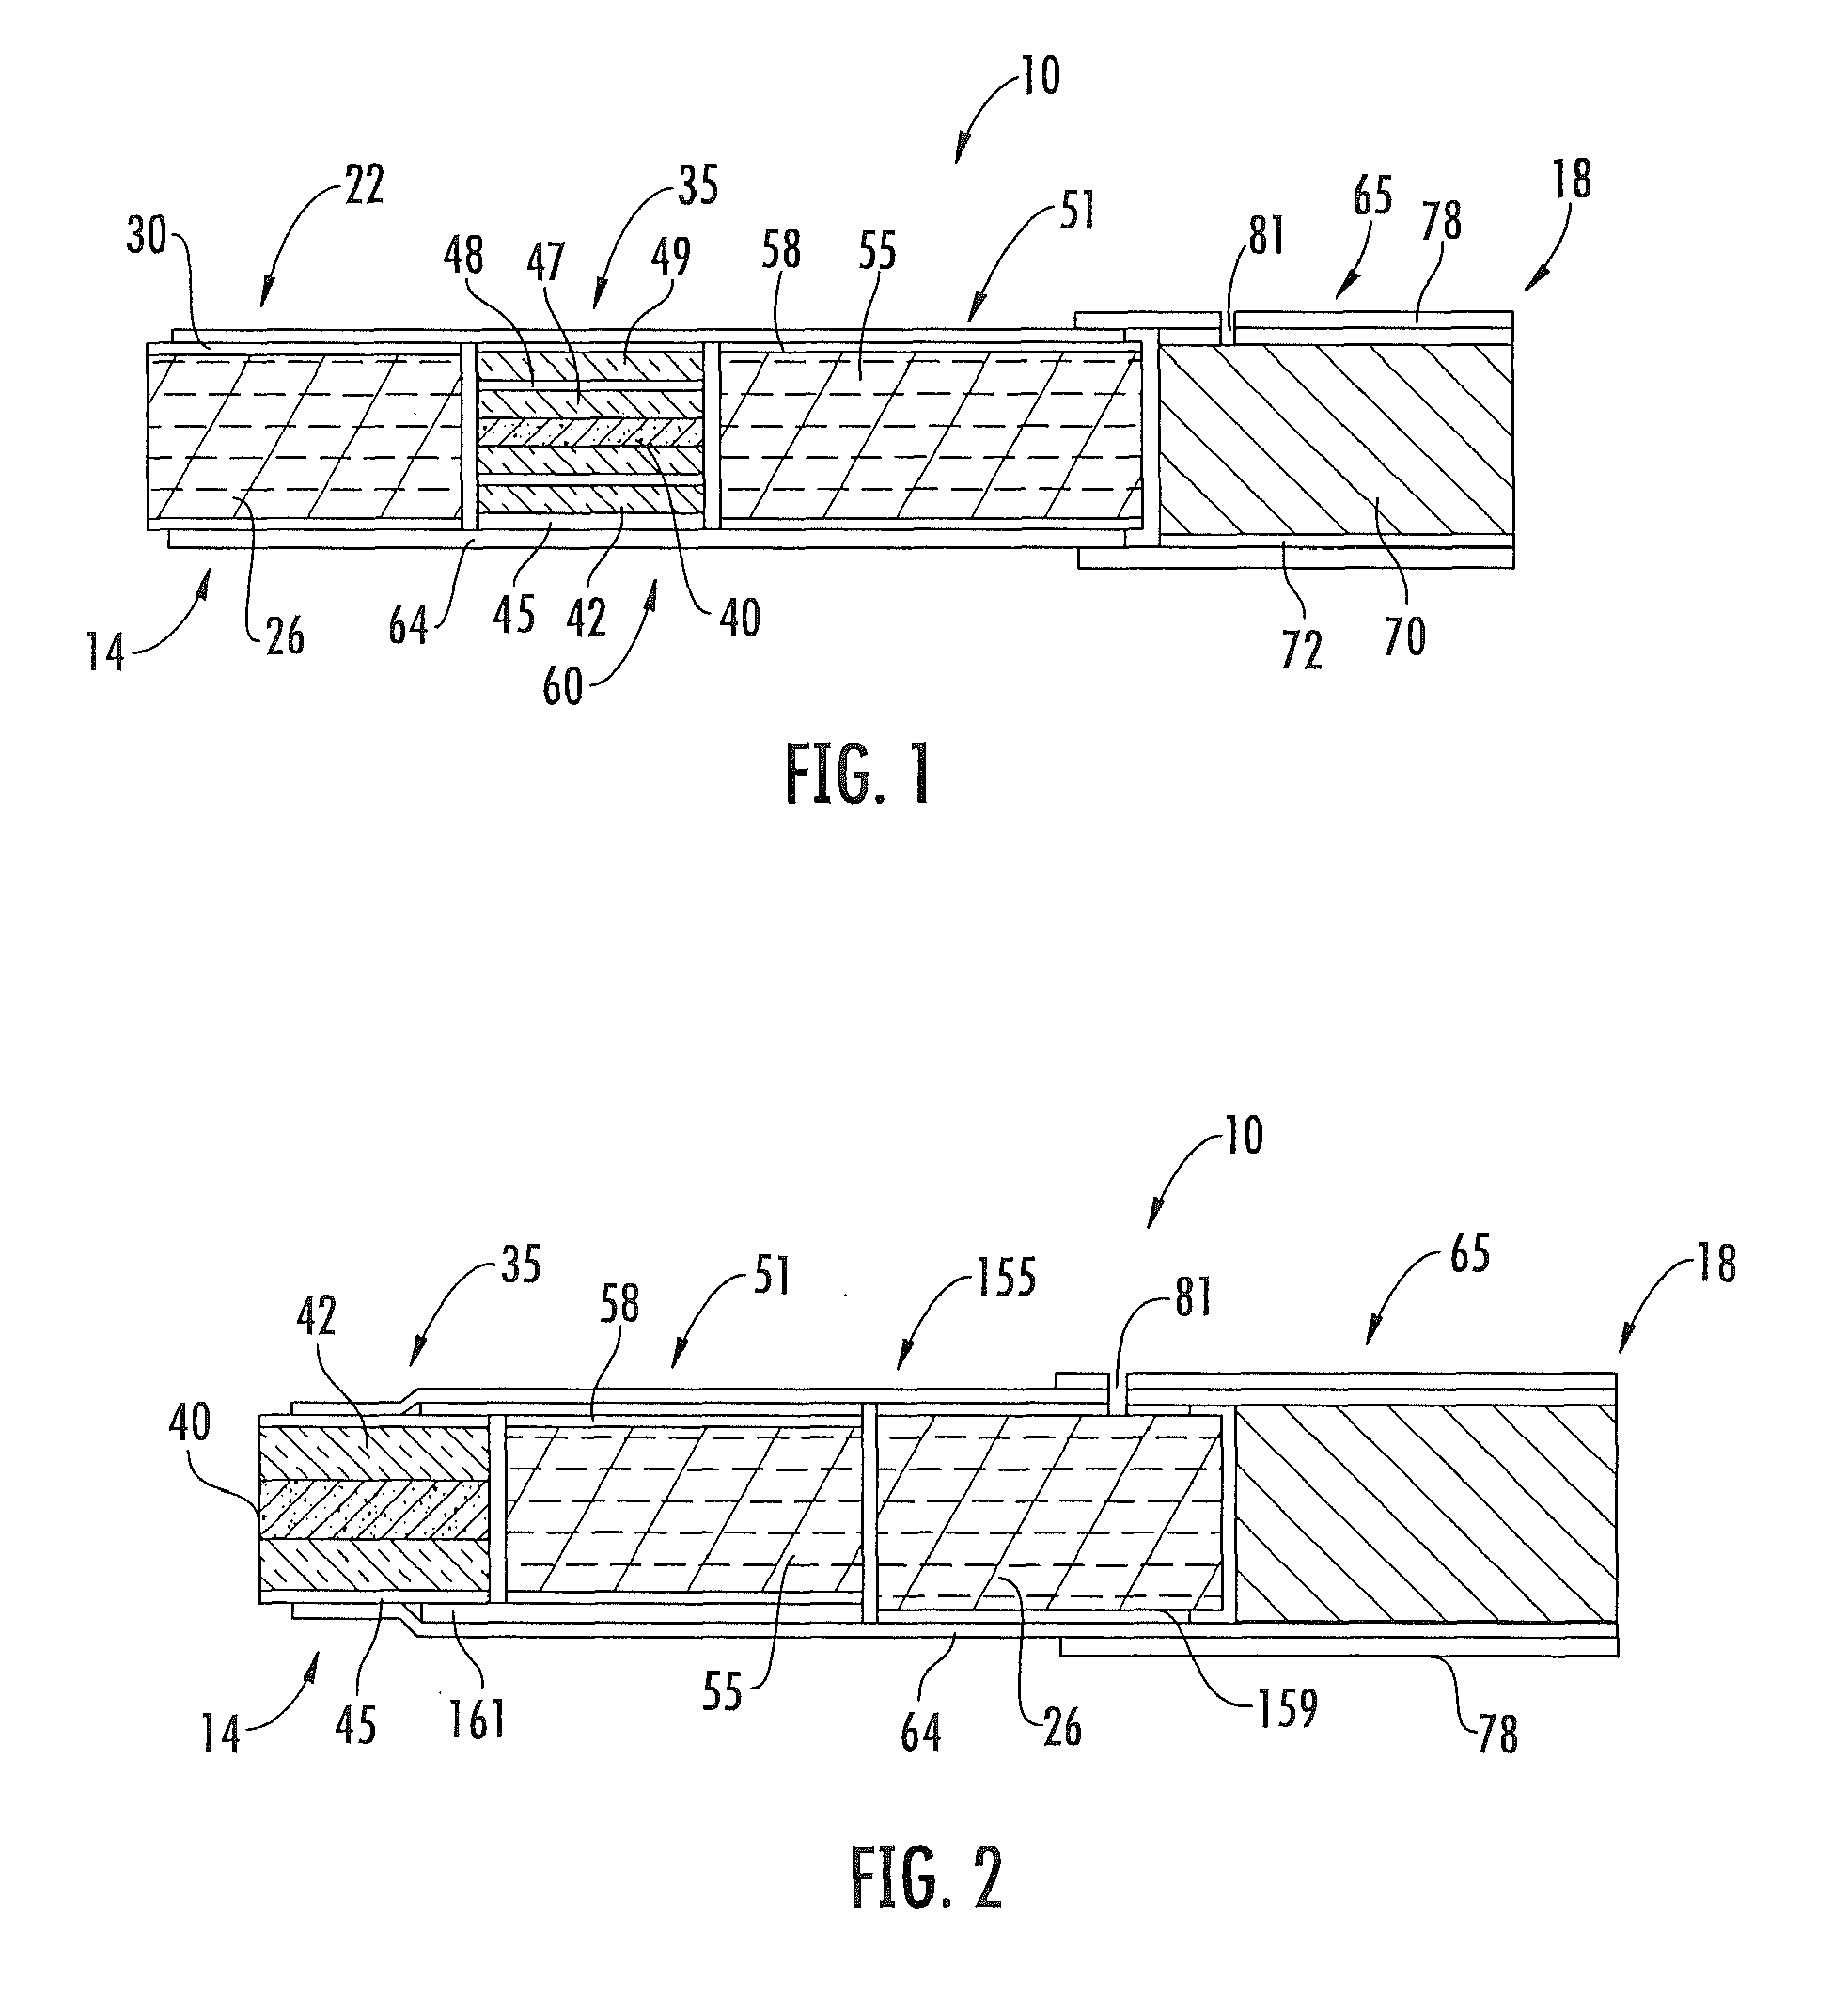 Method for preparing fuel element for smoking article